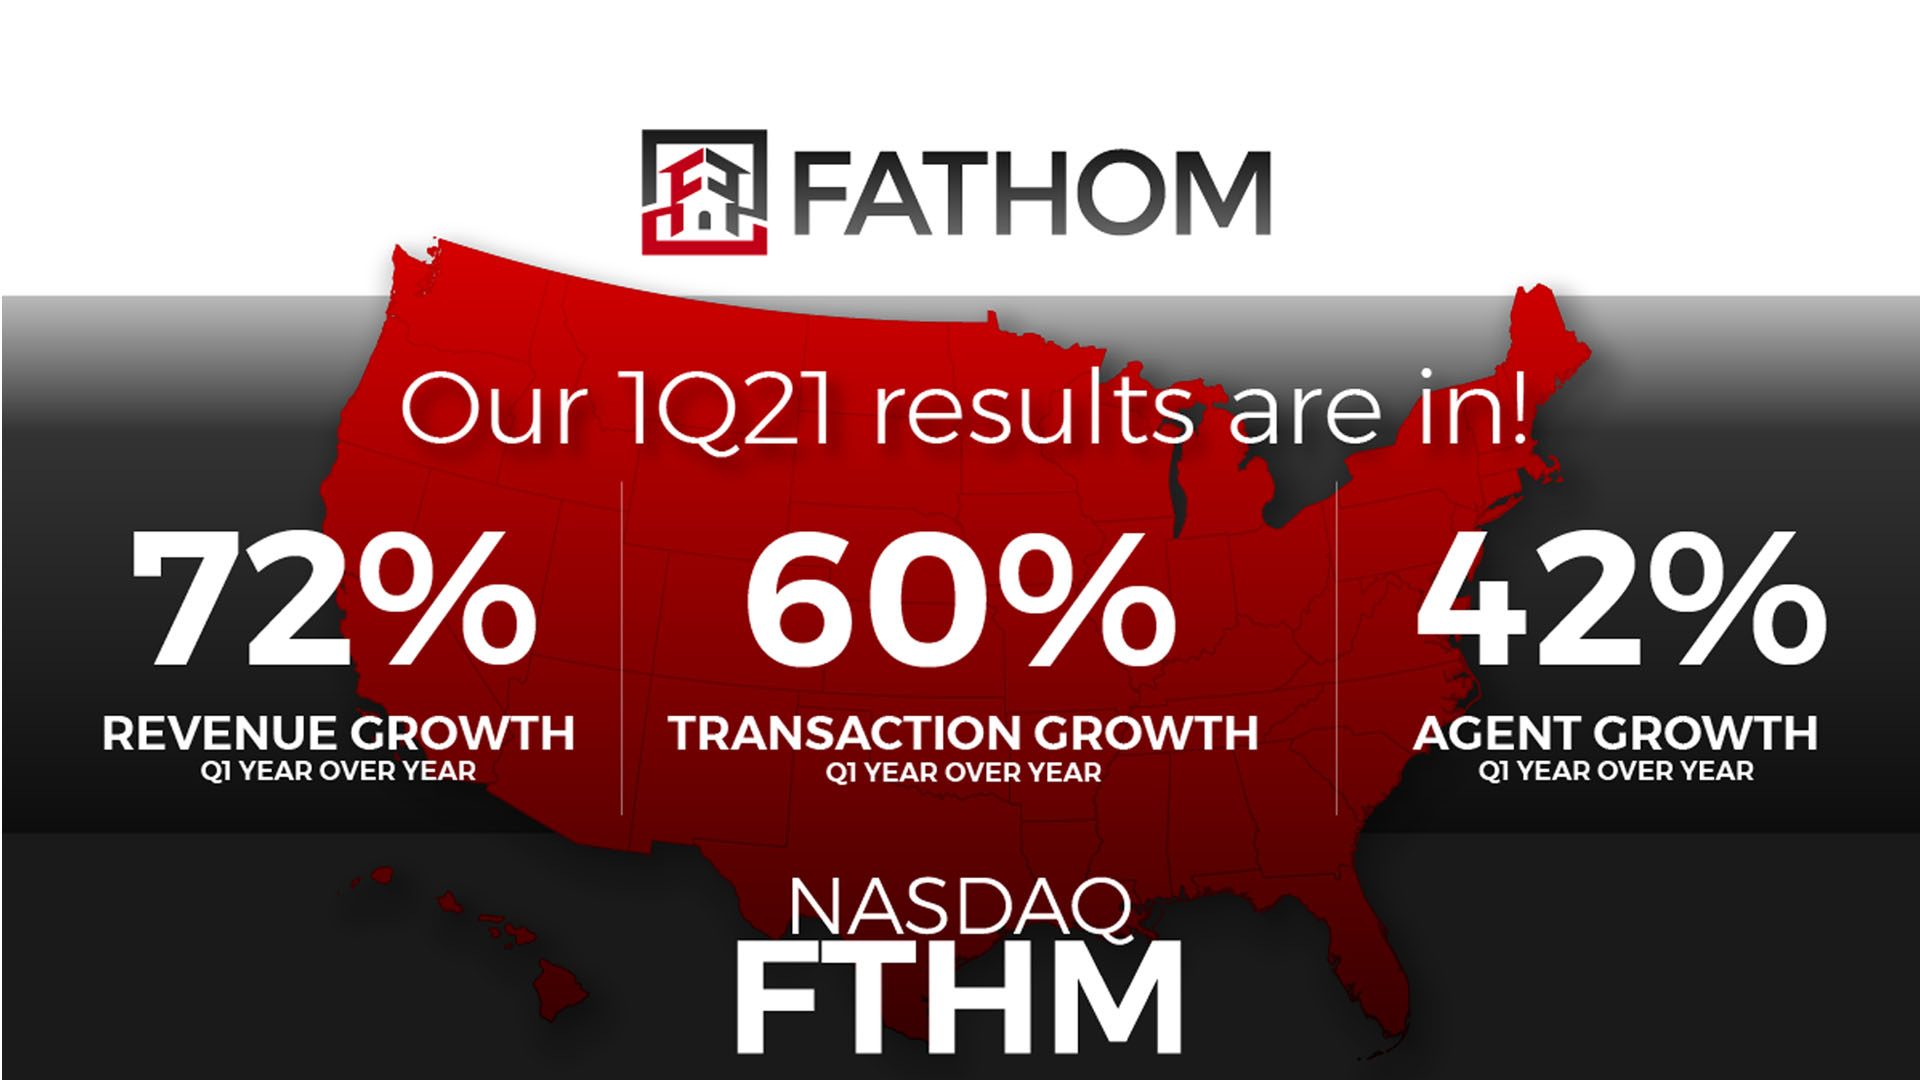 Featured image for “Fathom Holdings Reports First Quarter 2021 Results”